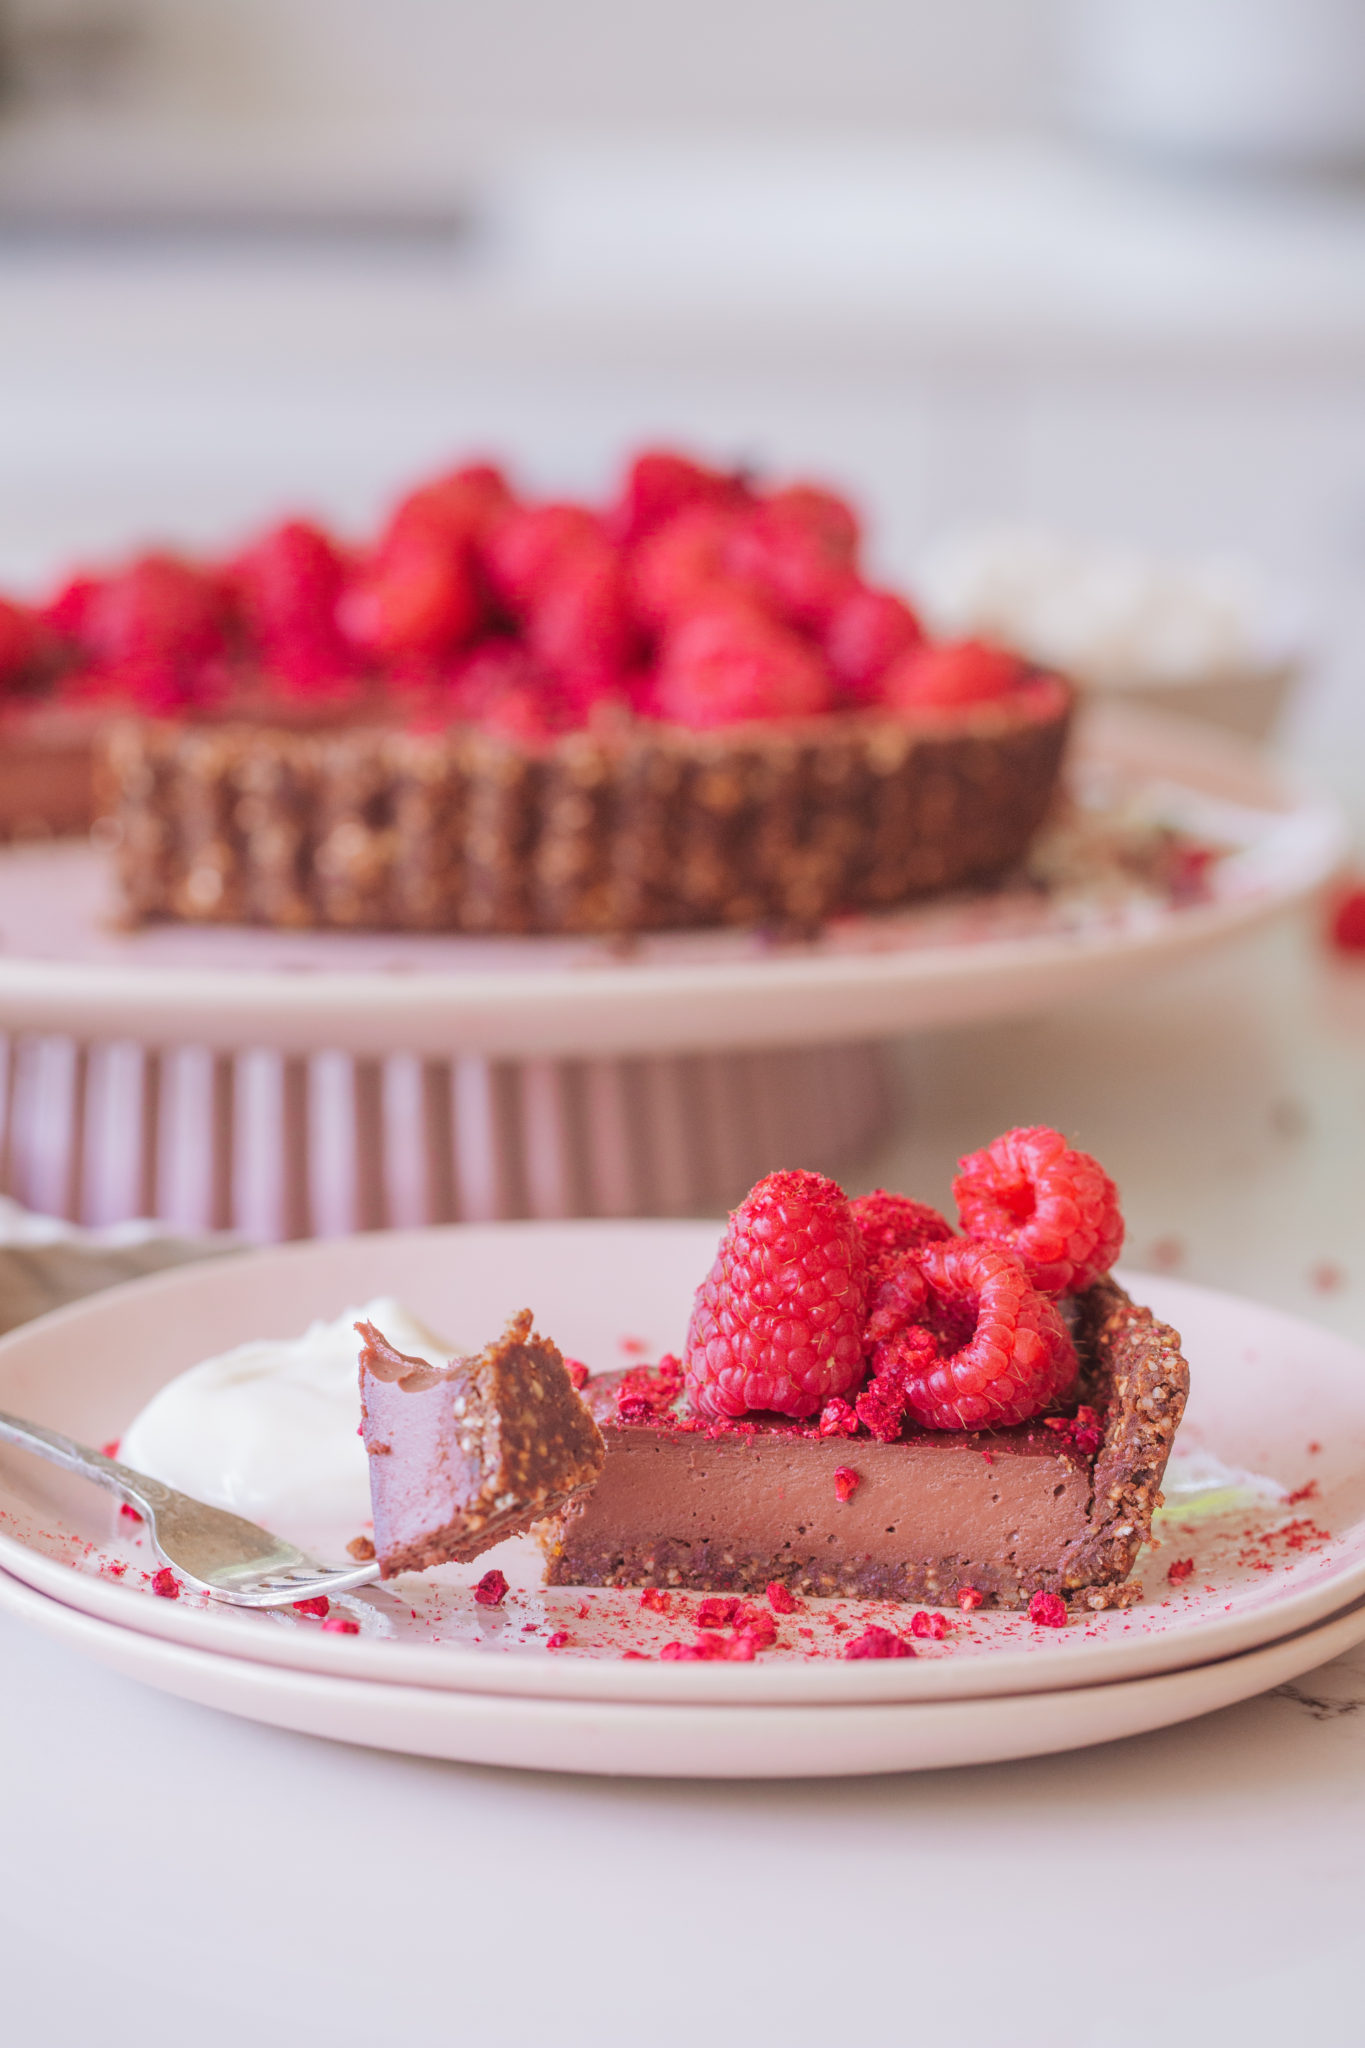 Sliced Chocolate Raspberry Tart, covered in raspberries, cacao nibs on large pink plate with fork 